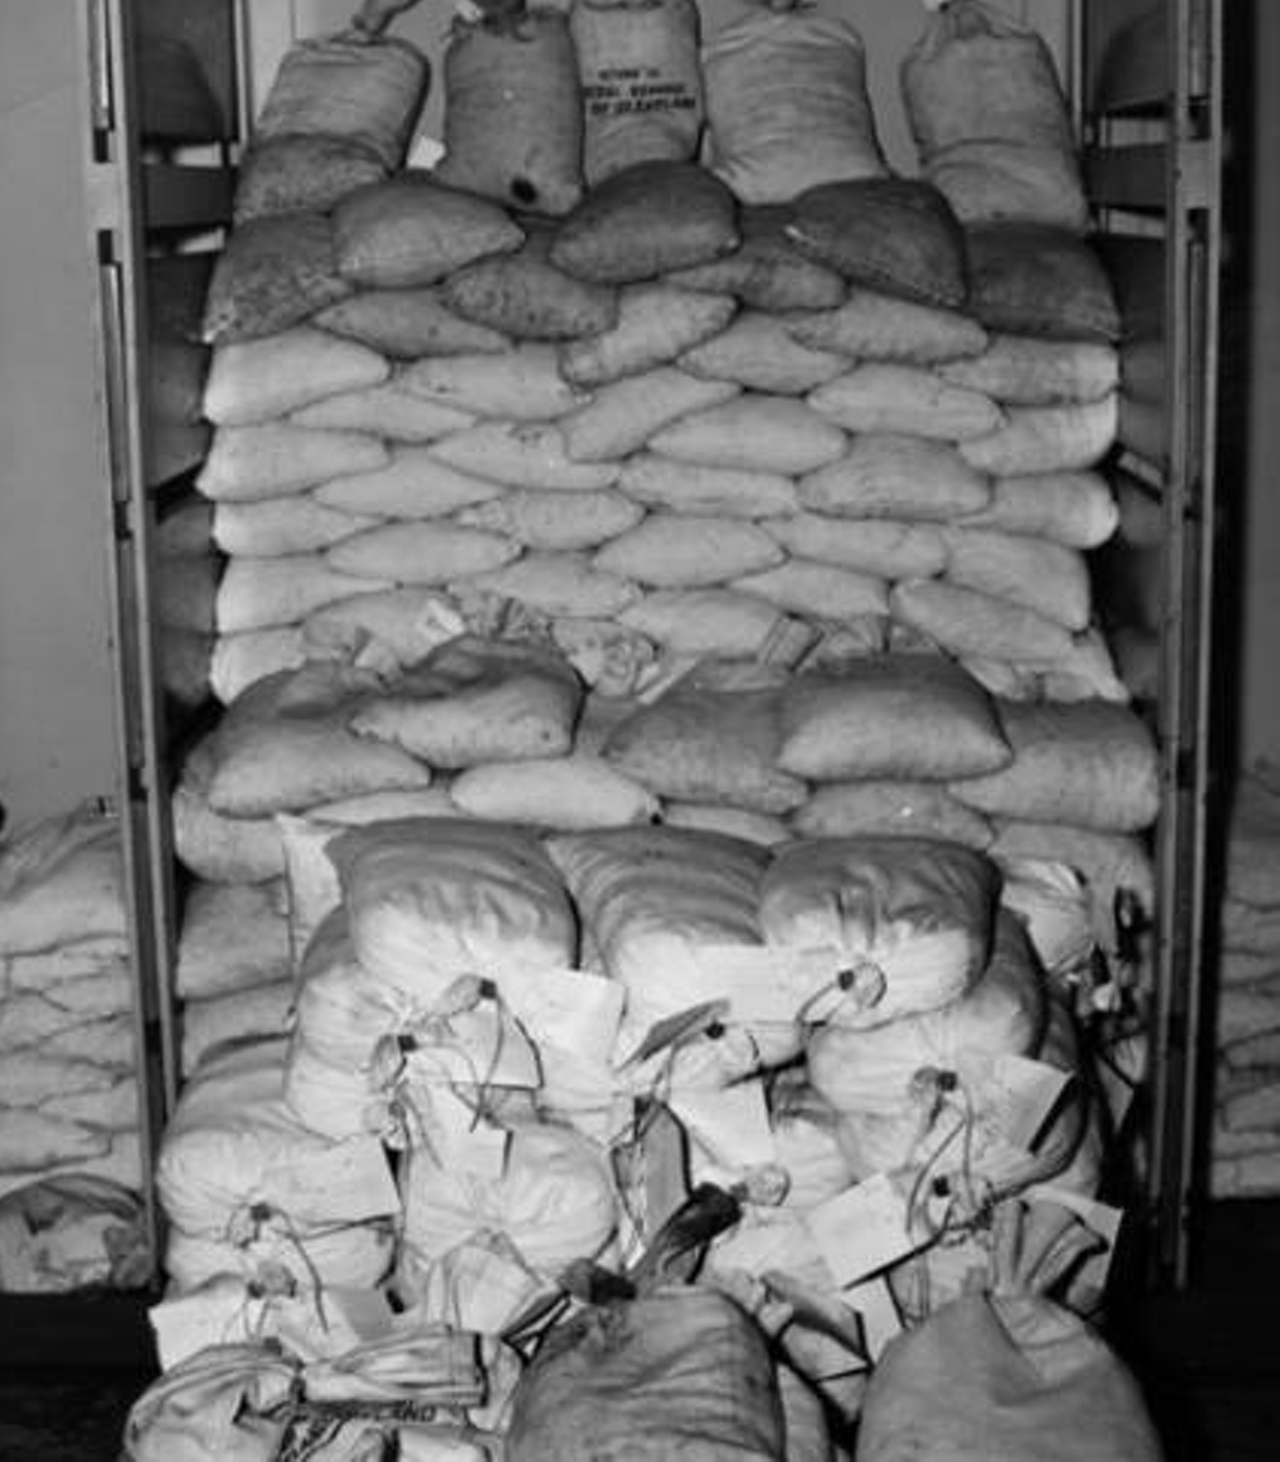 Money in sacks piled high at the Federal Reserve Bank of Cleveland, 1940.